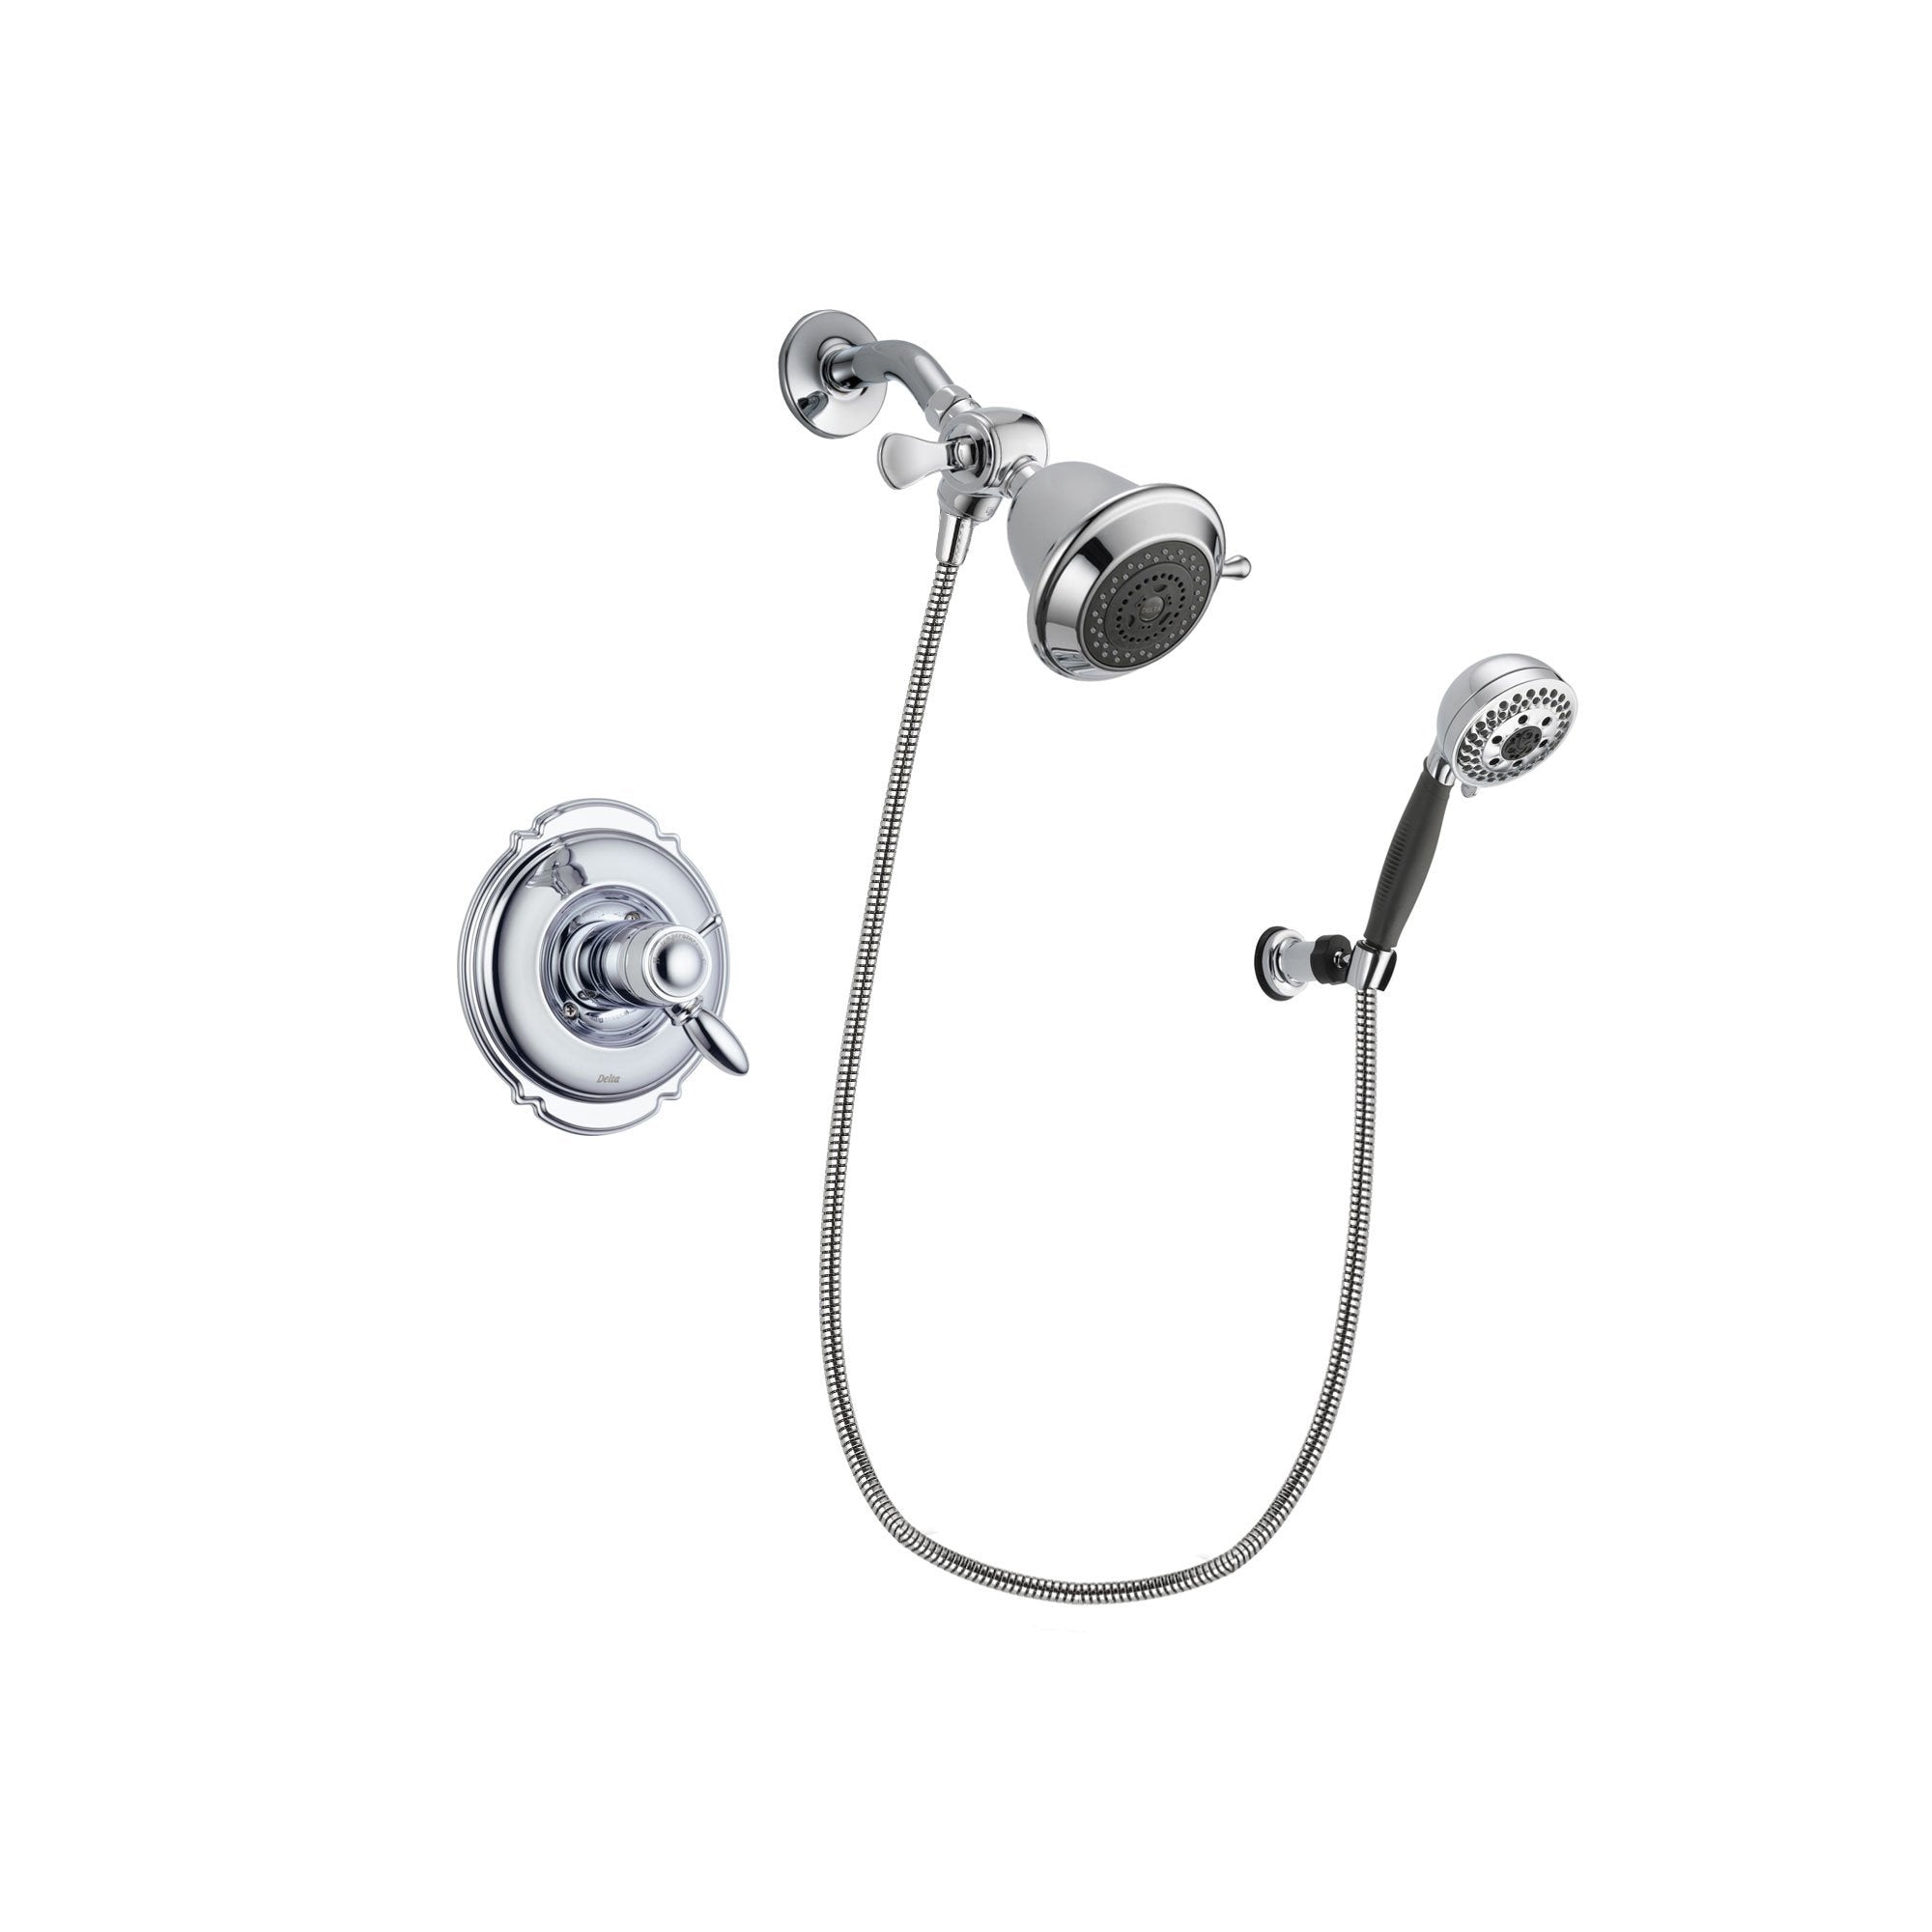 Delta Victorian Chrome Shower Faucet System Package with Hand Shower DSP1108V